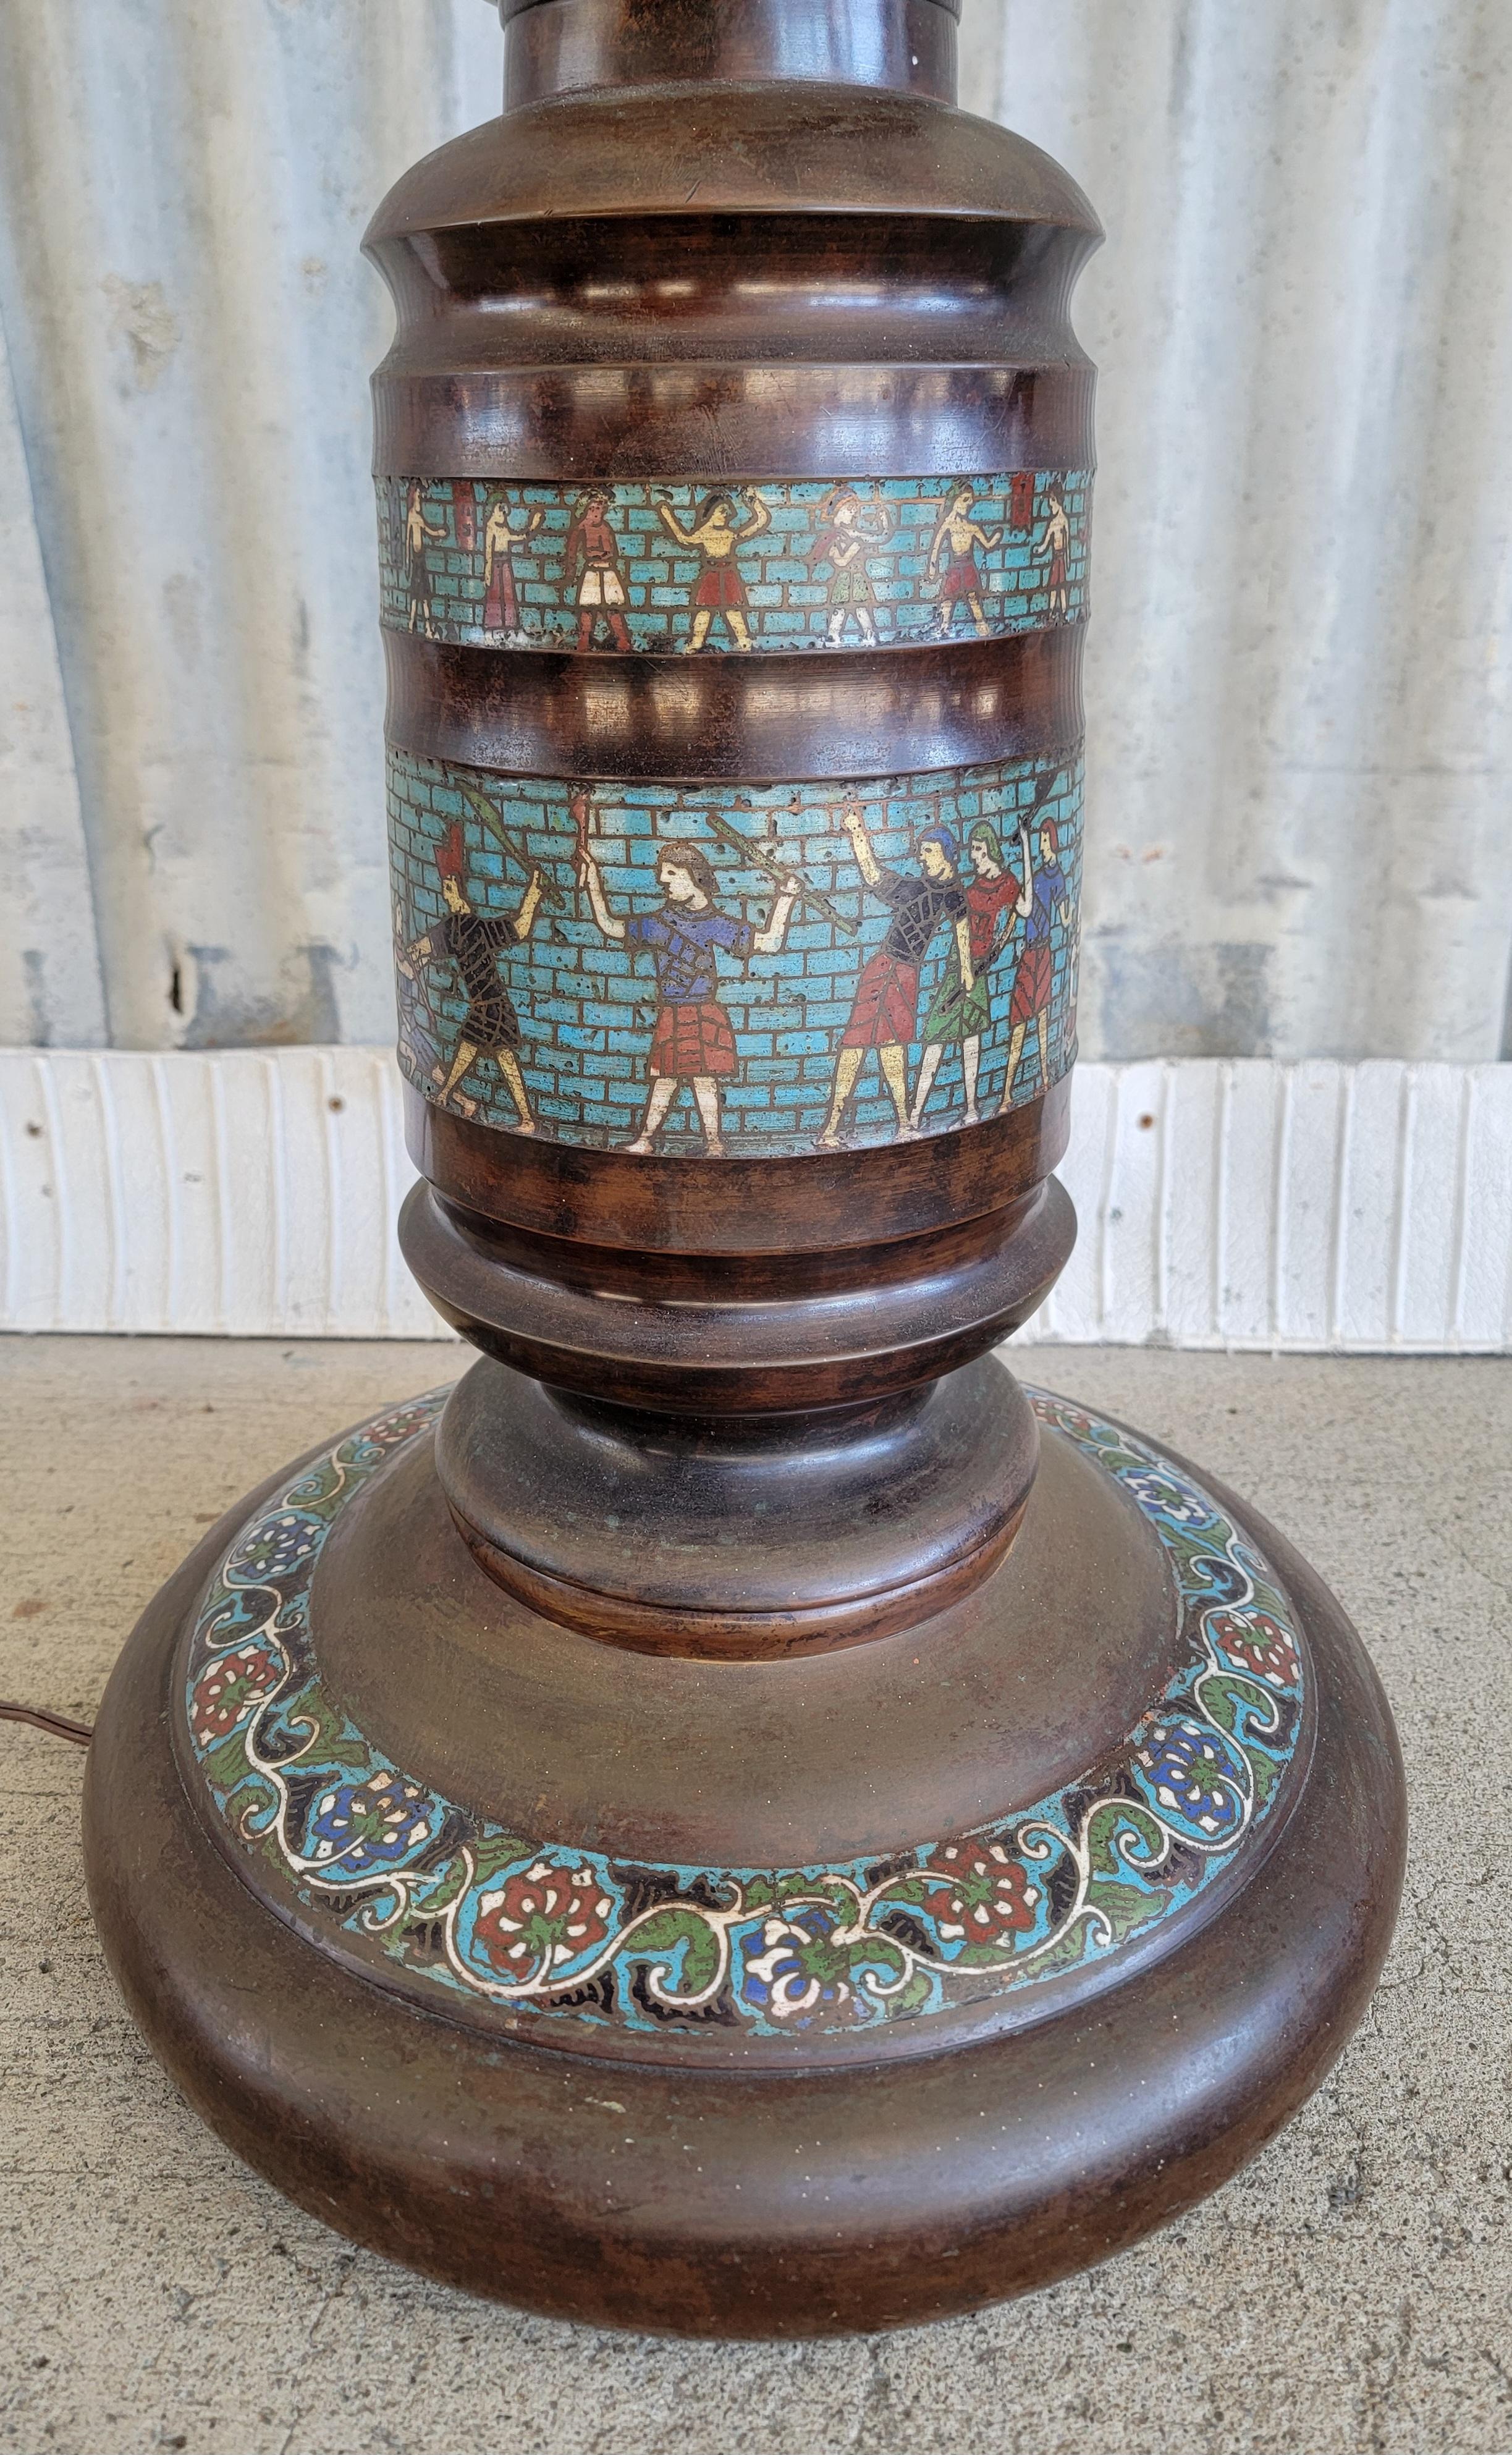 Unusual Egyptian Revival Japanese bronze floor lamp with cloisonne Egyptian figures. Measures 73 in to top of finial. Base measures 14 in diameter. Very good original condition with deep patina to bronze. Socket and shade harp have been replaced. In